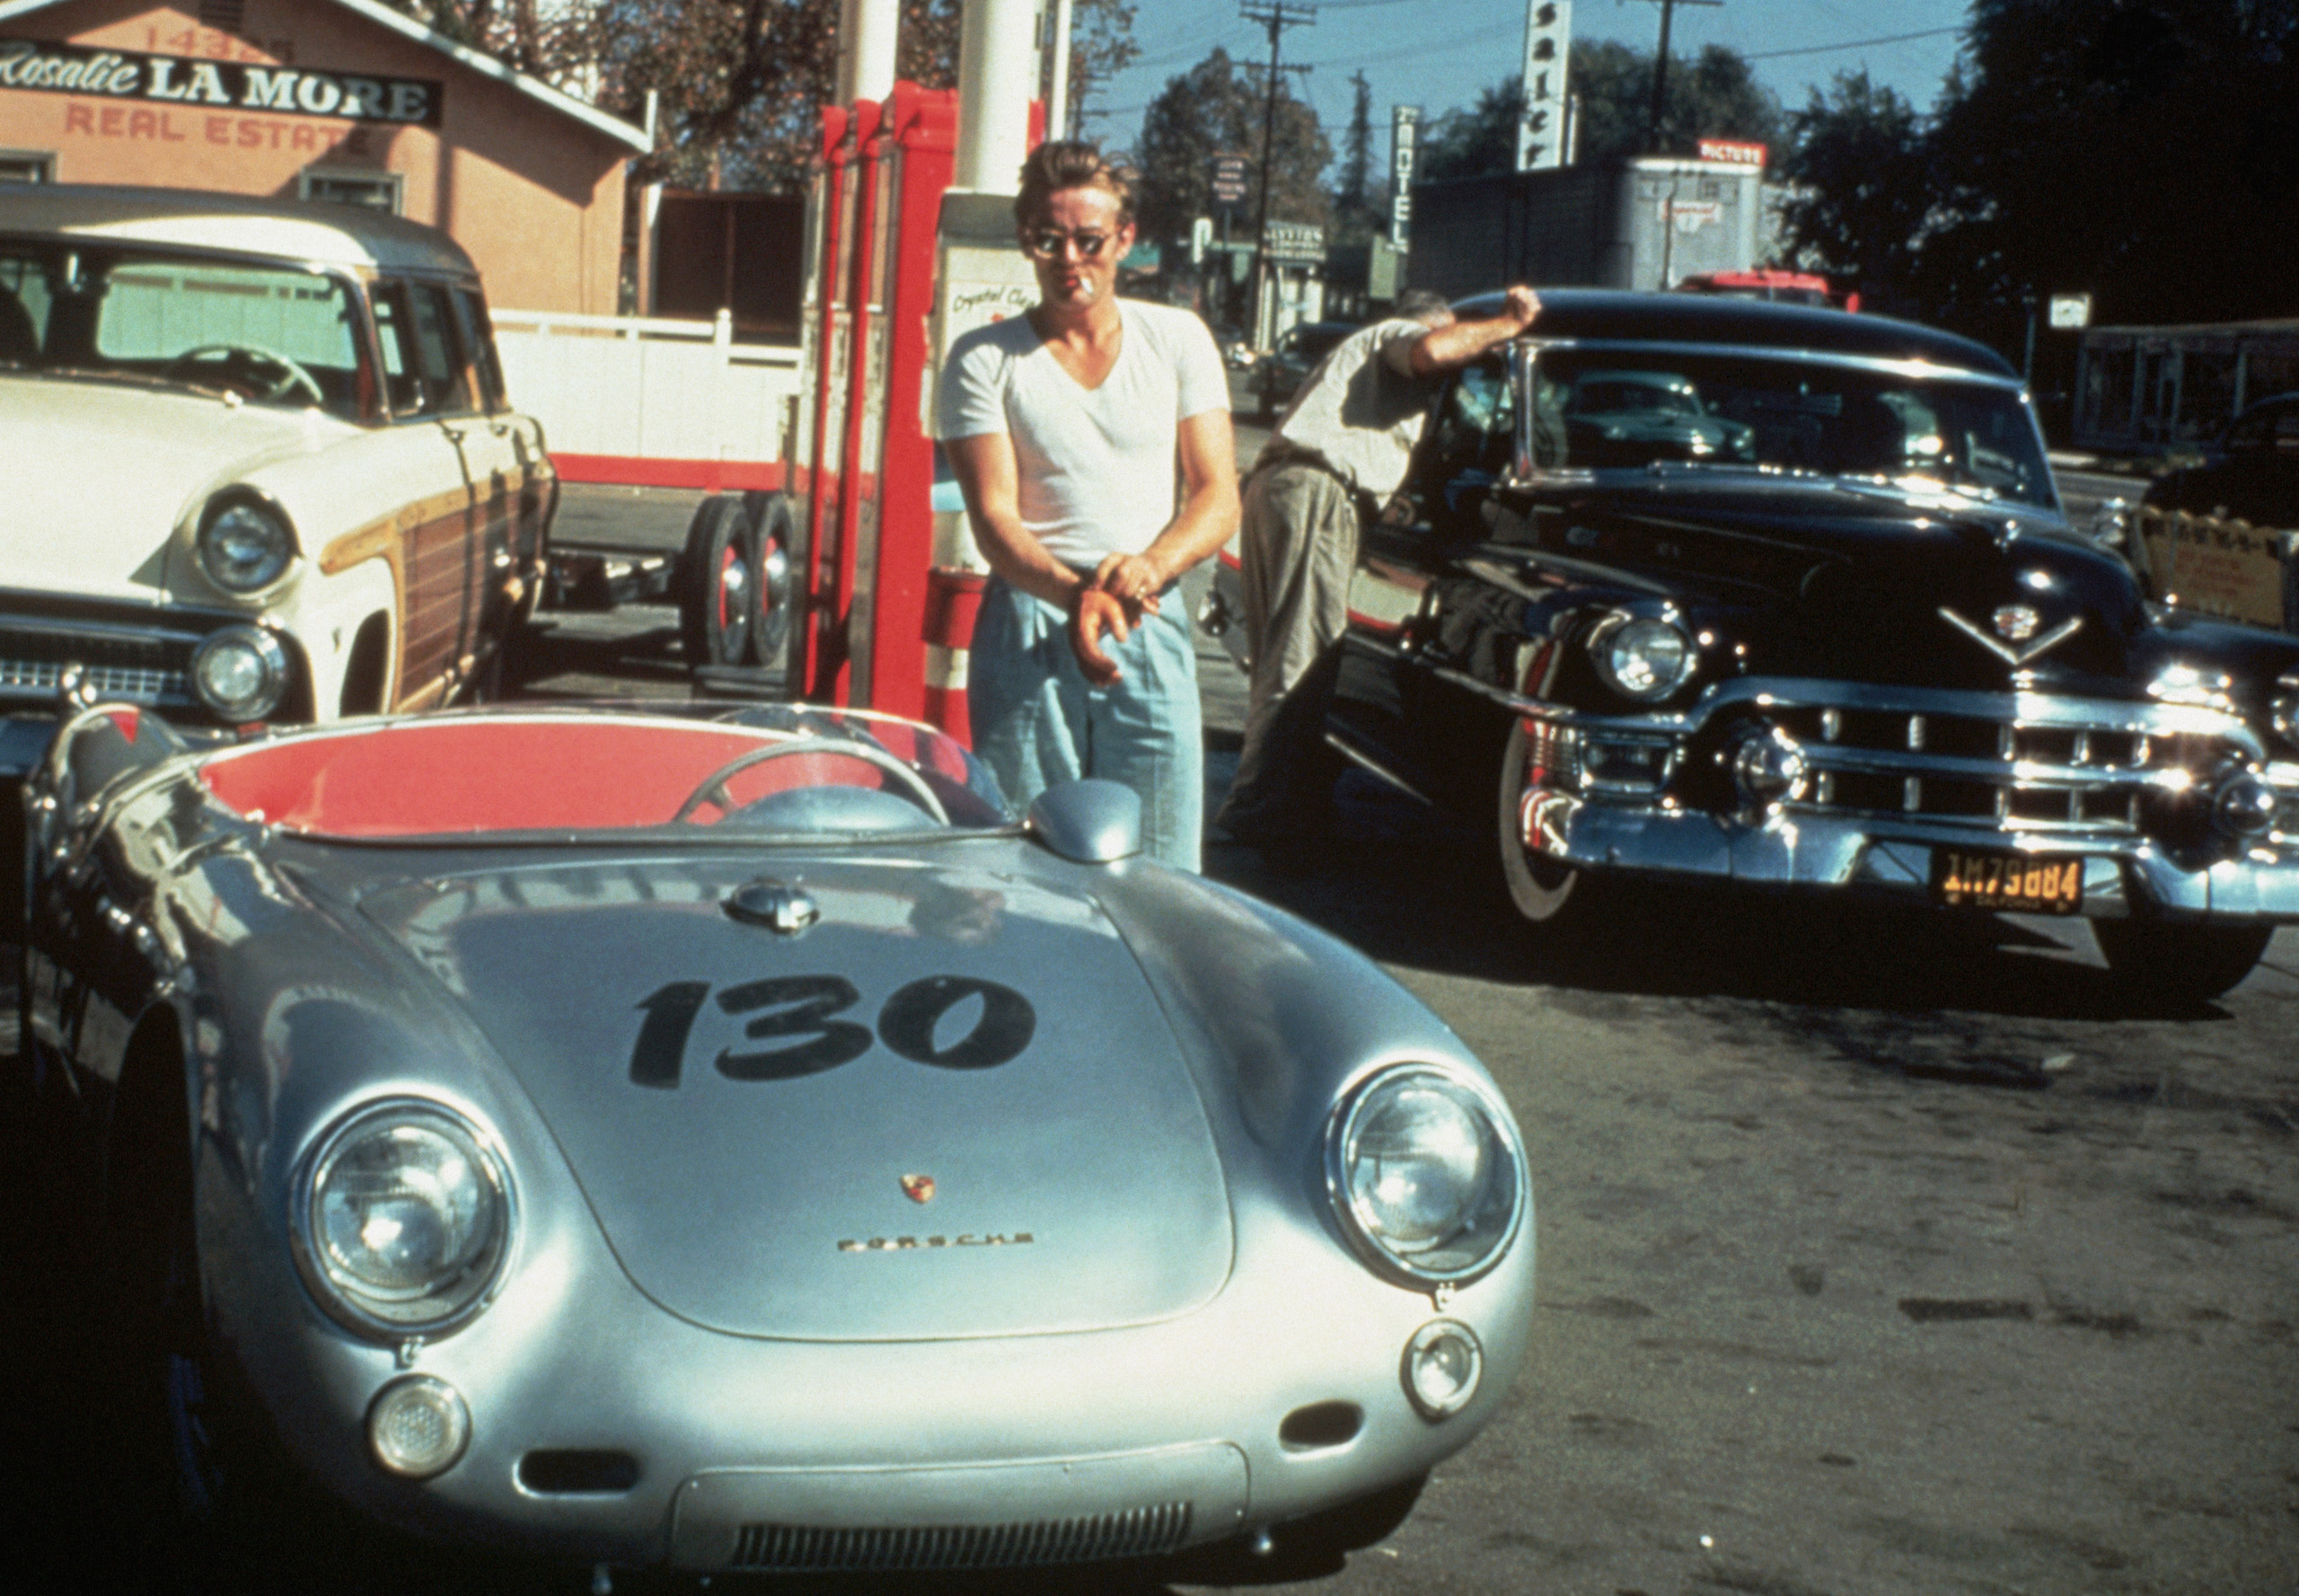 James Dean, the actor who loved speed